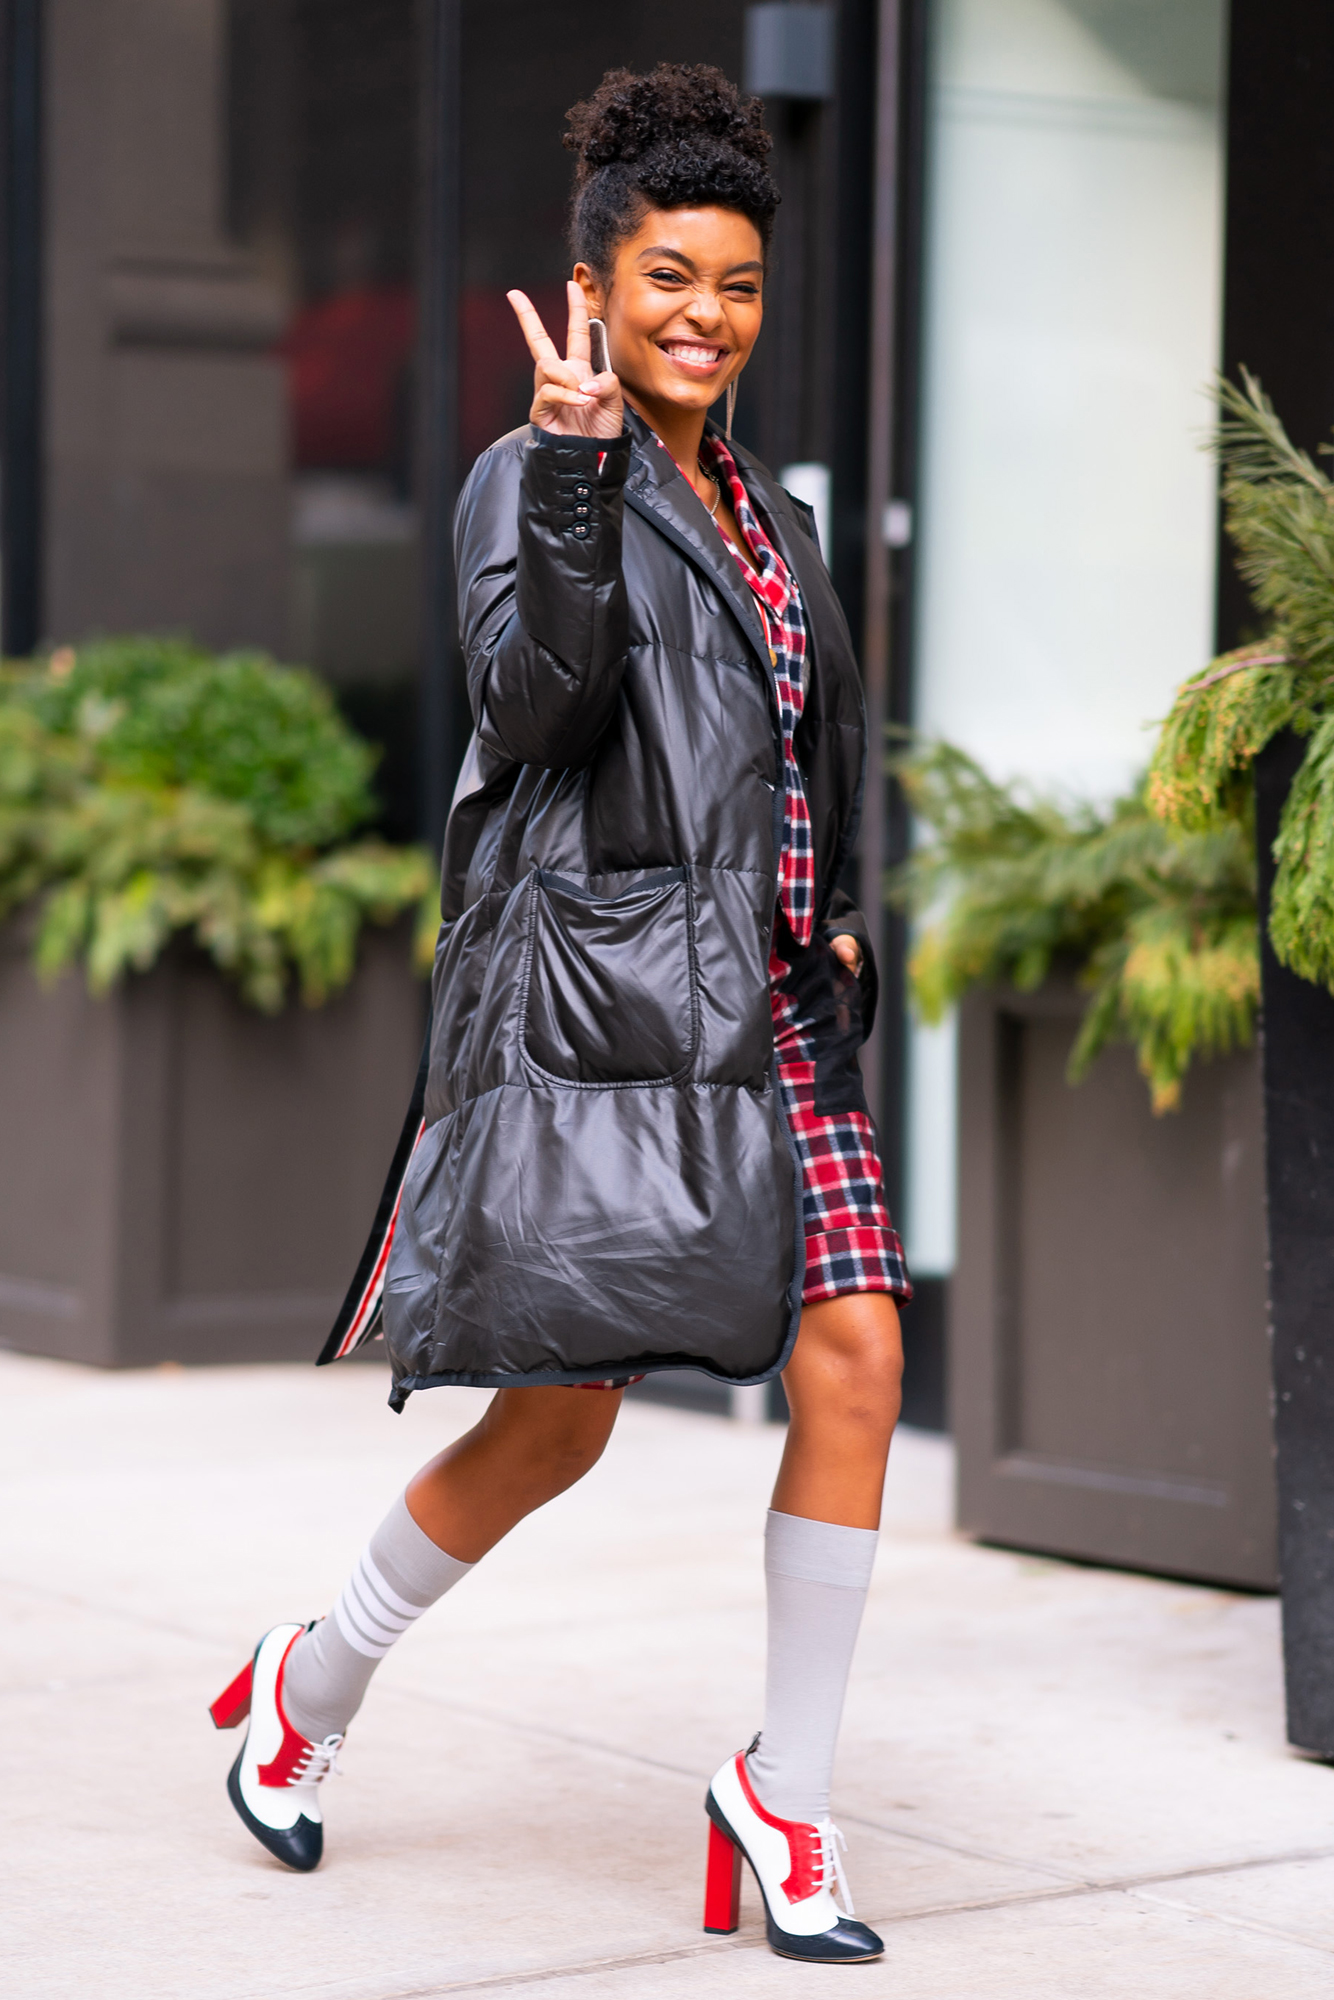 Winter style inspiration from the A-list – Celebrity style